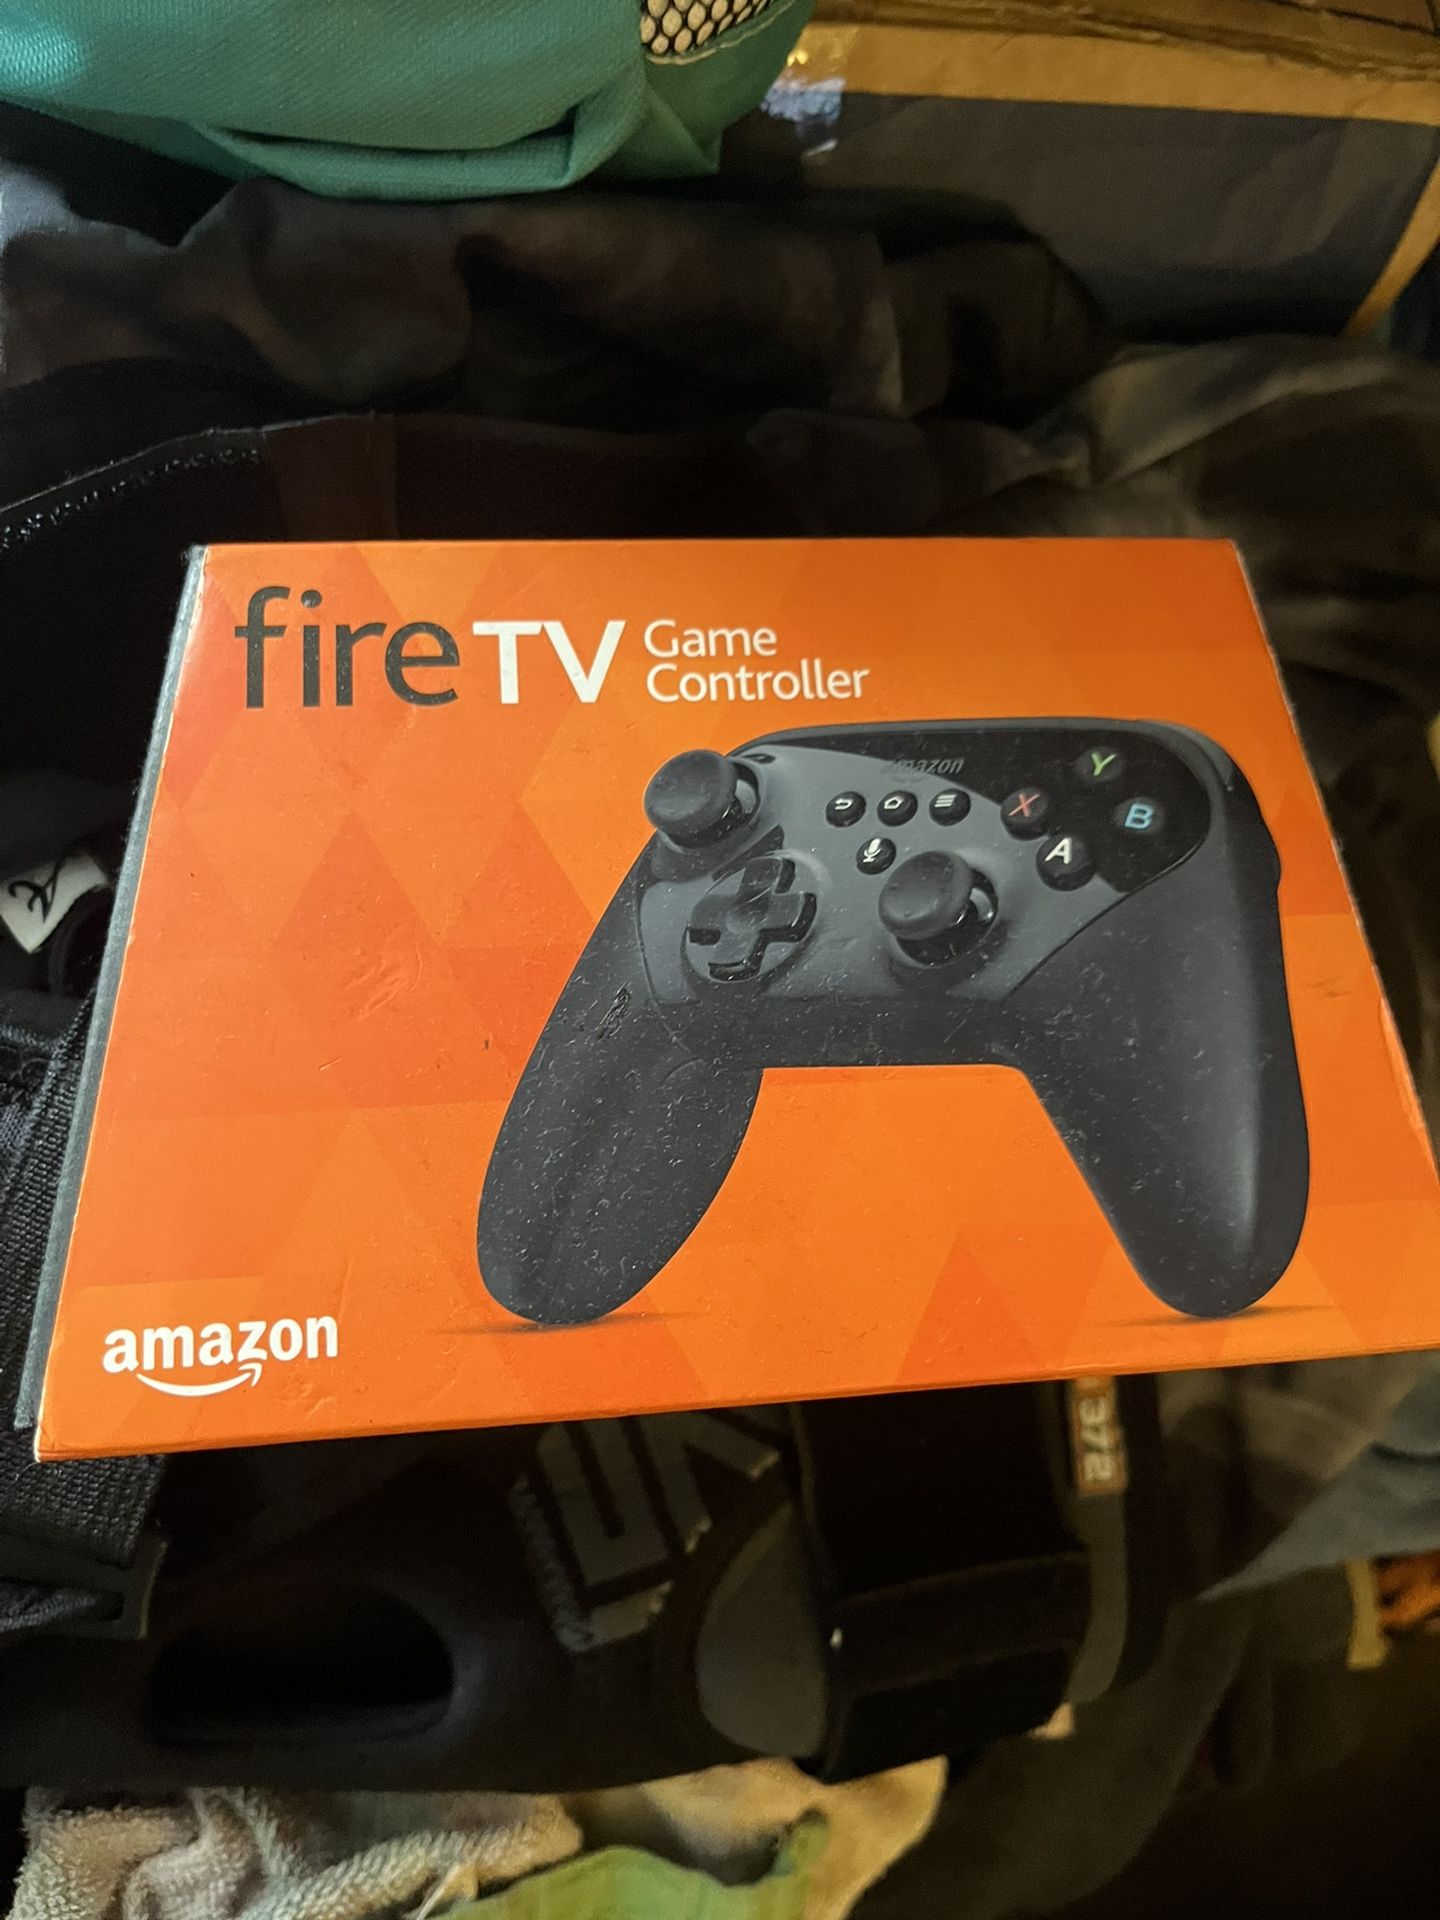 Brand new fire Stick gaming controller